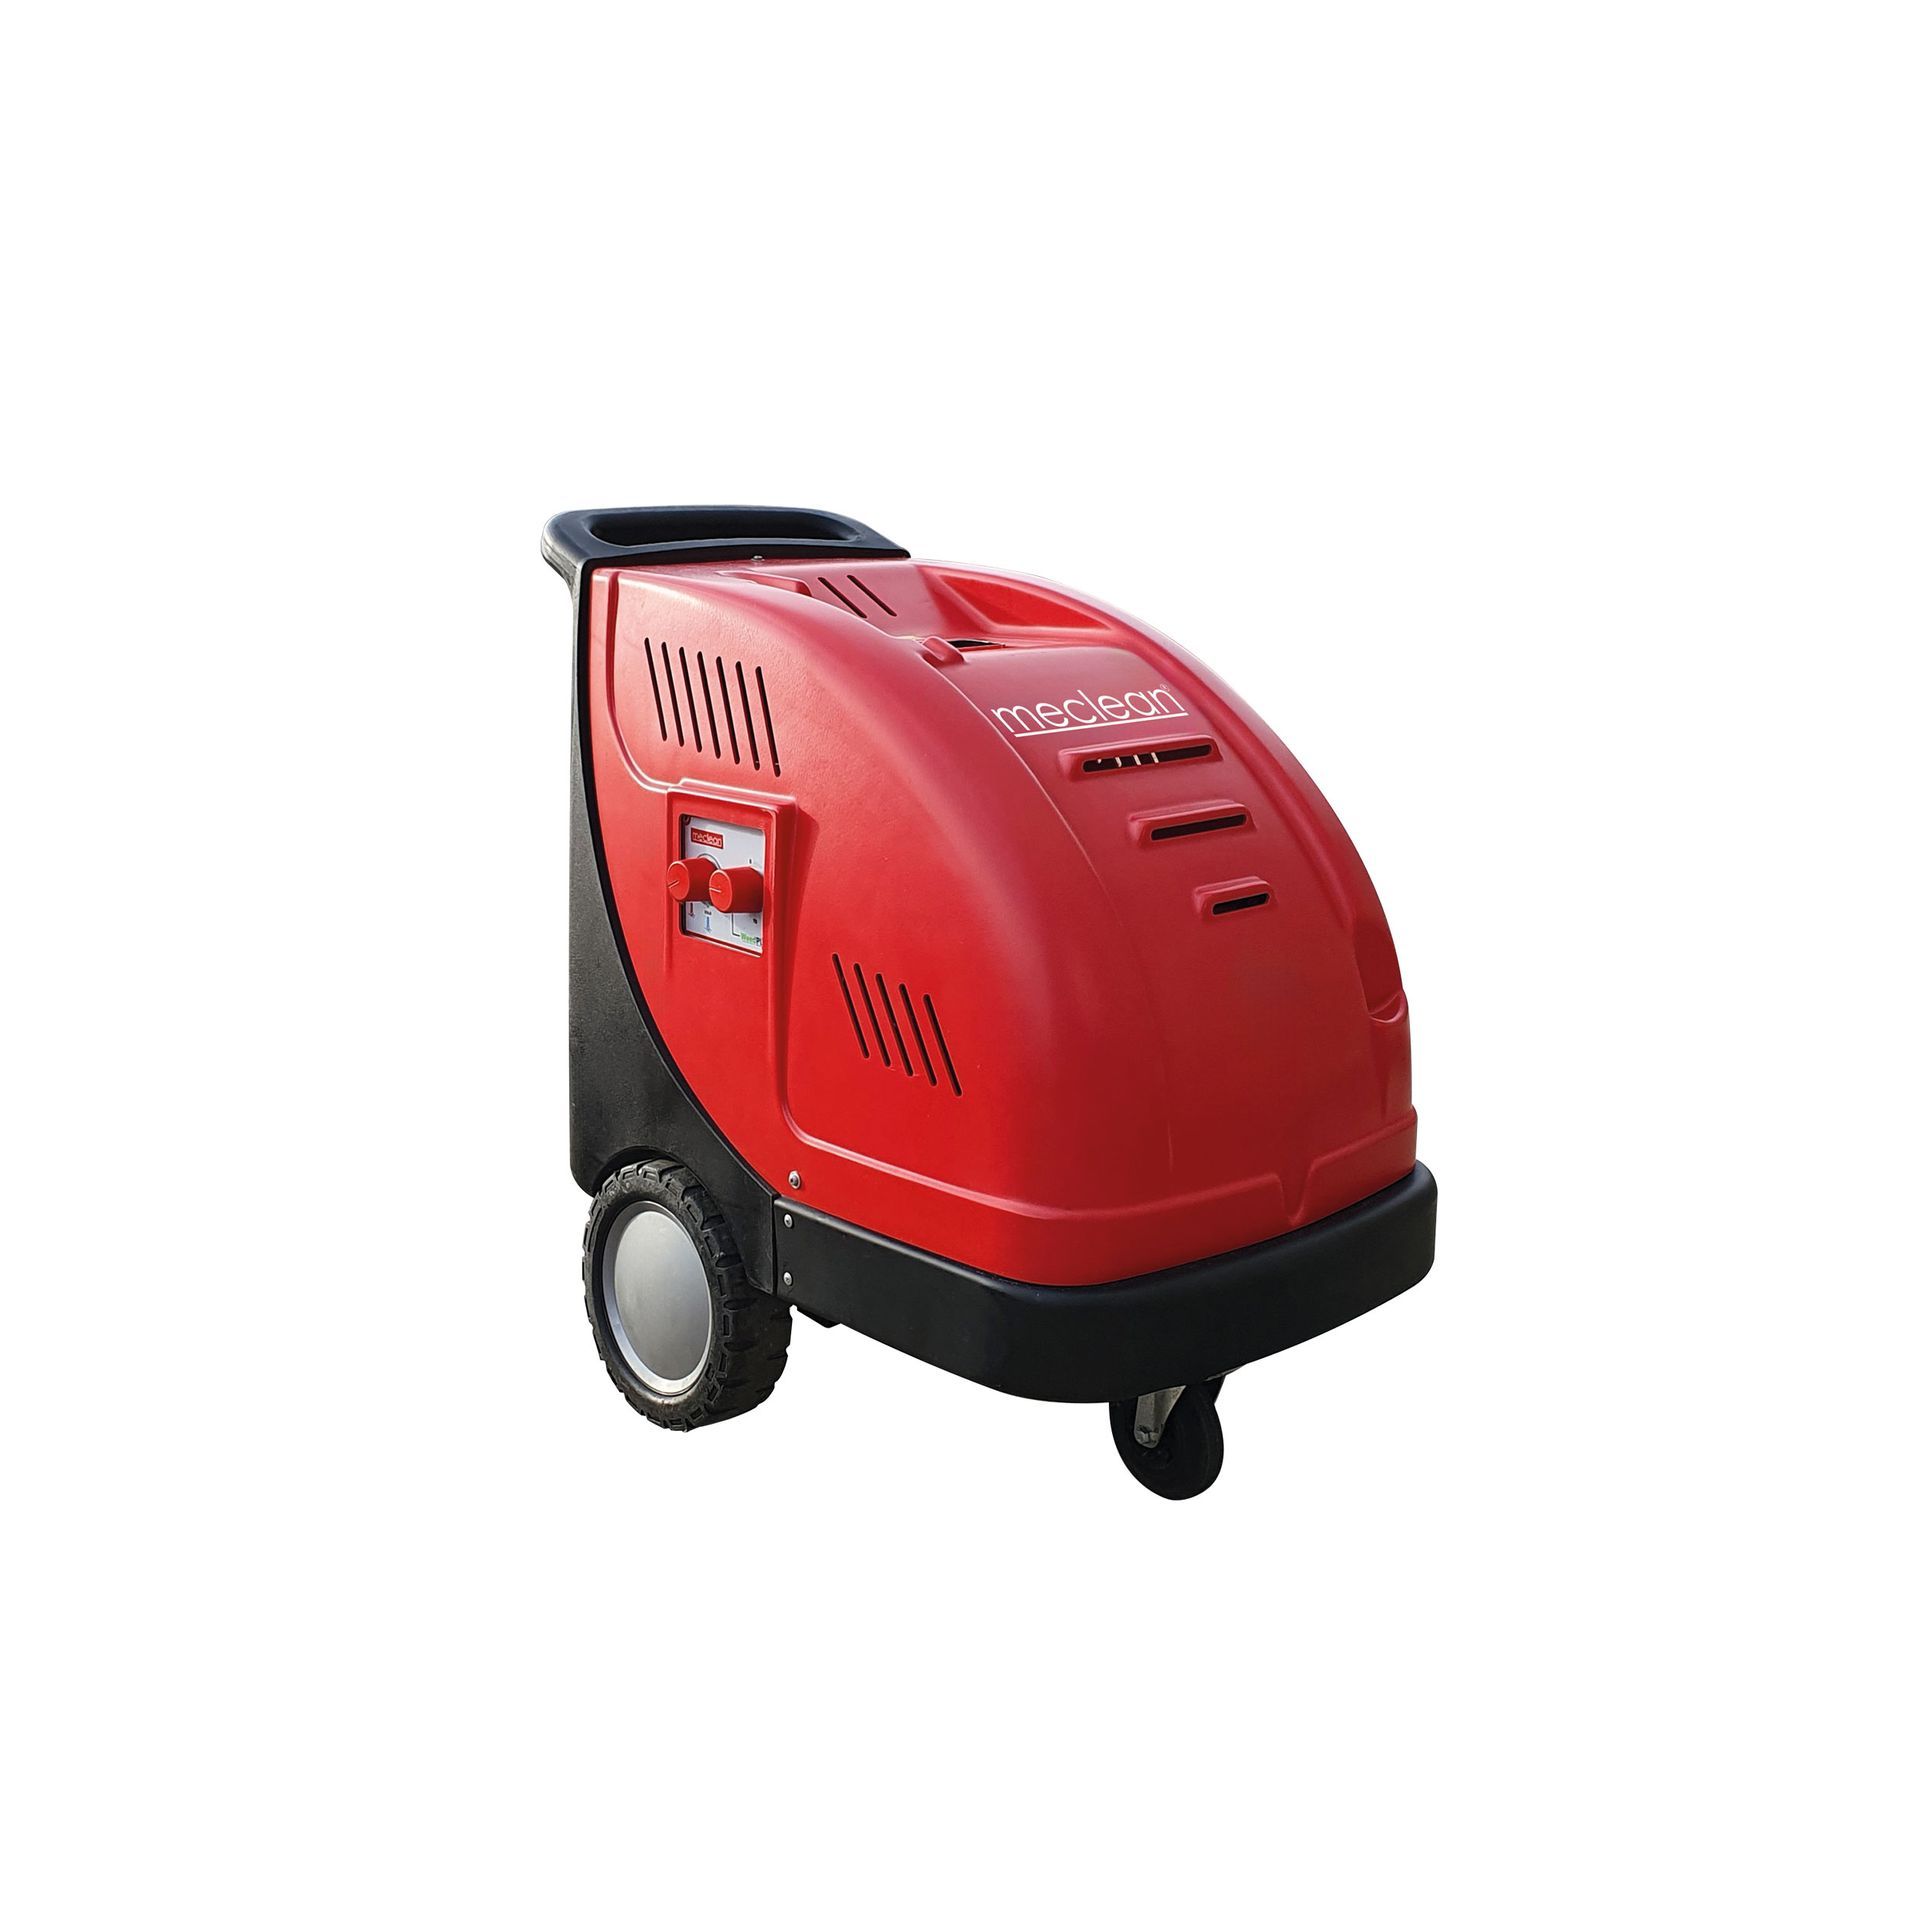 Meclean professional hot water high-pressure cleaner SERIE-B 120/8 with WeedPLUS